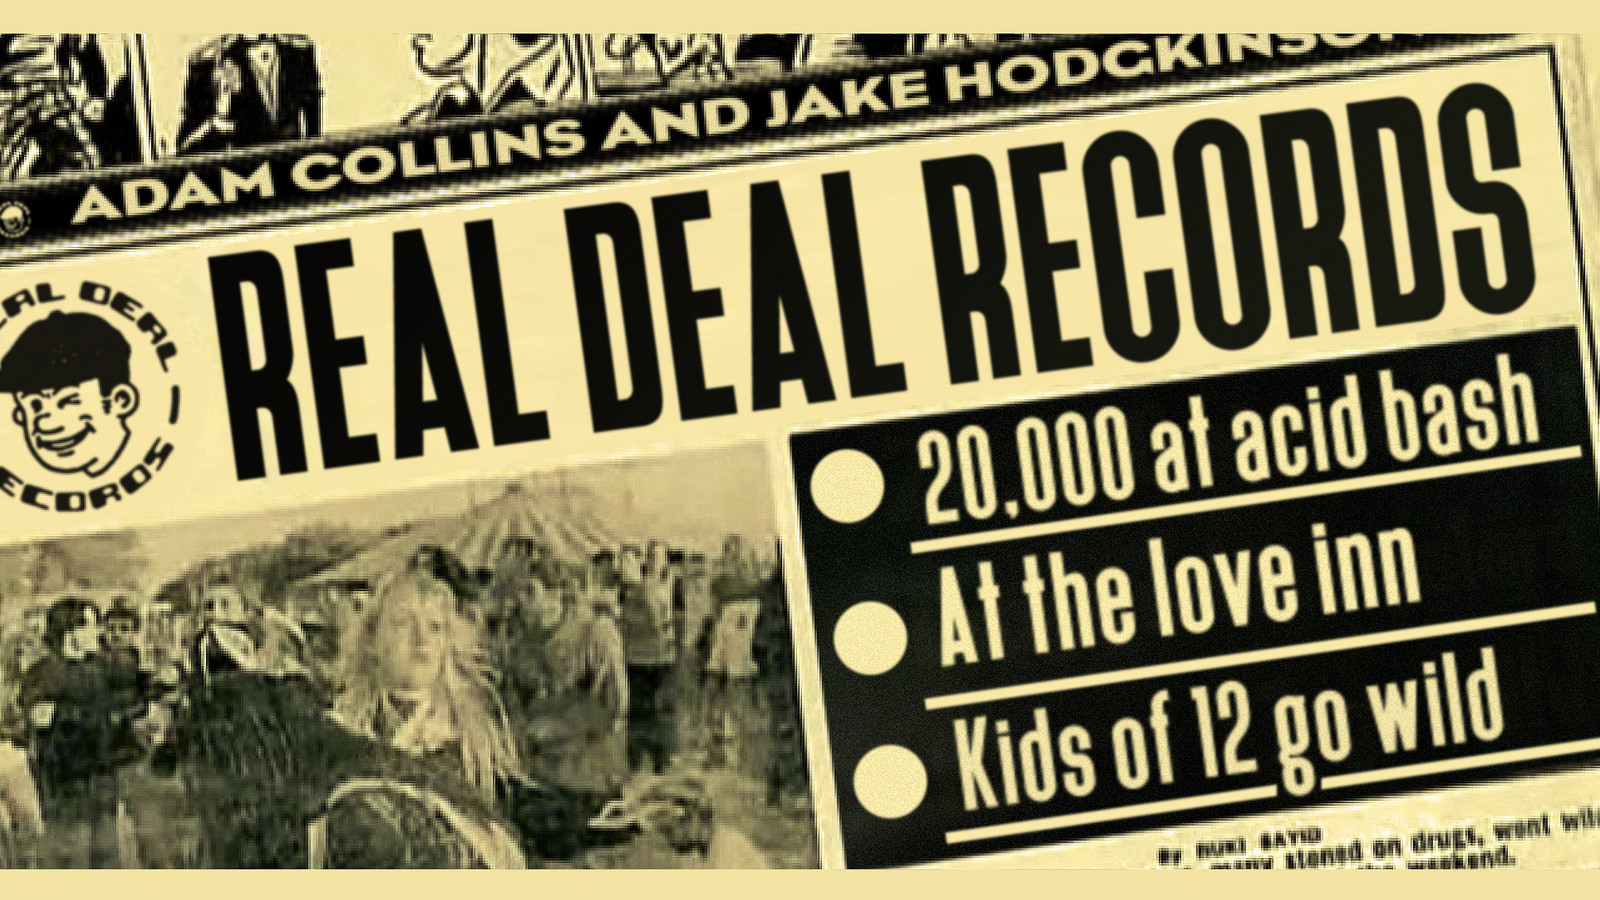 Real Deal Records w/ Adam Collins at The Love Inn